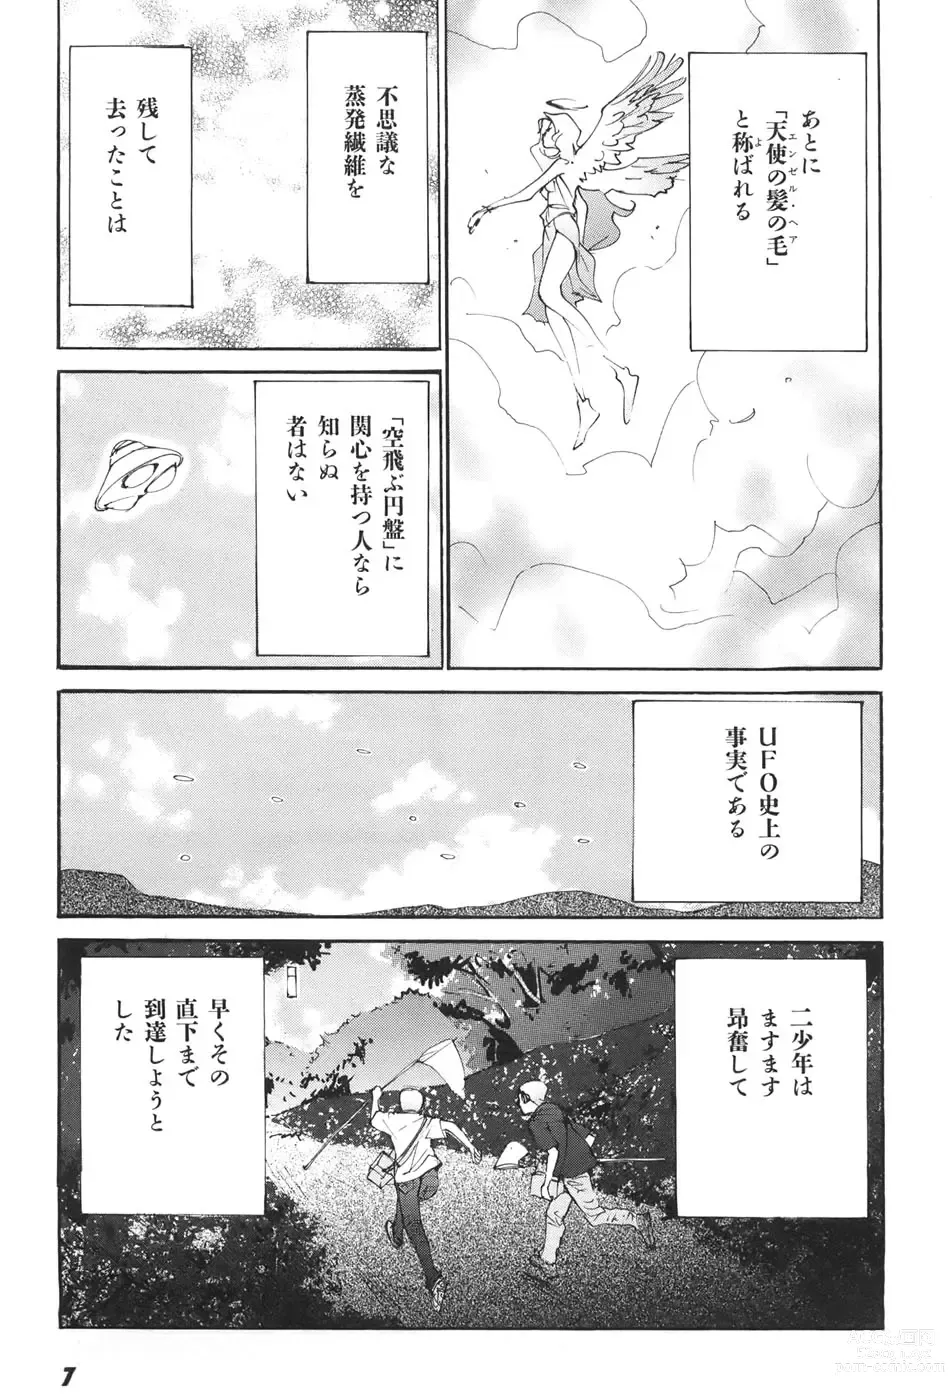 Page 11 of doujinshi Yapoo the human cattle vol.04